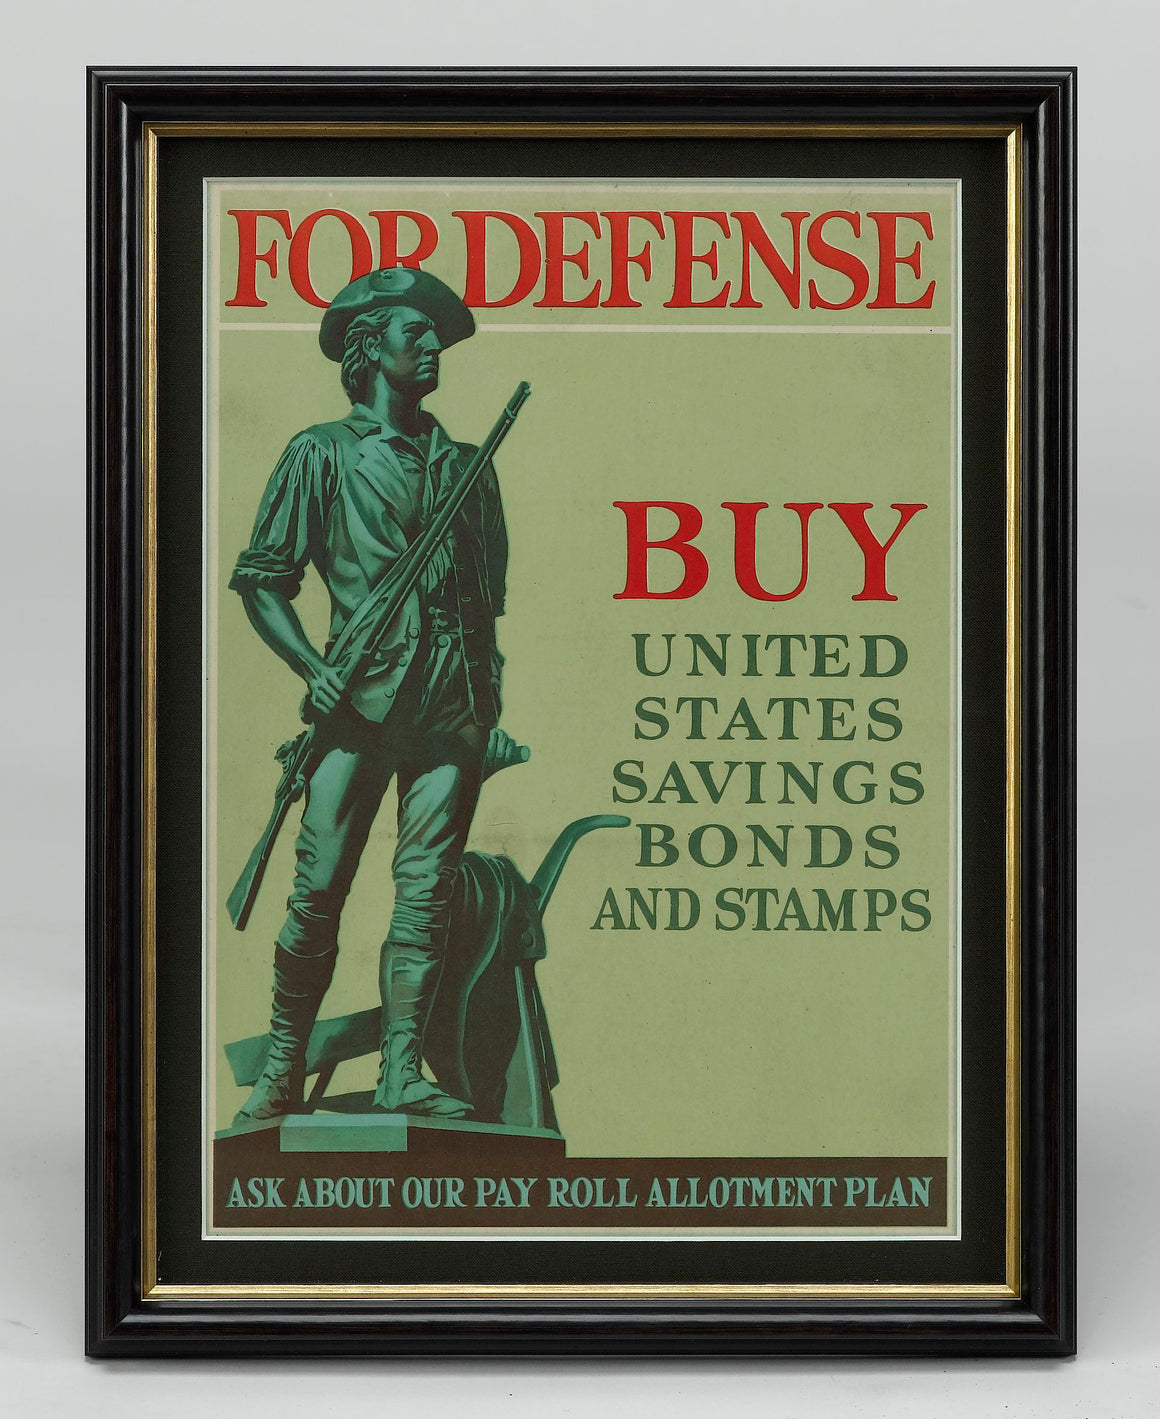 "For Defense. Buy United States Savings Bonds and Stamps." Vintage WWII Poster, 1941